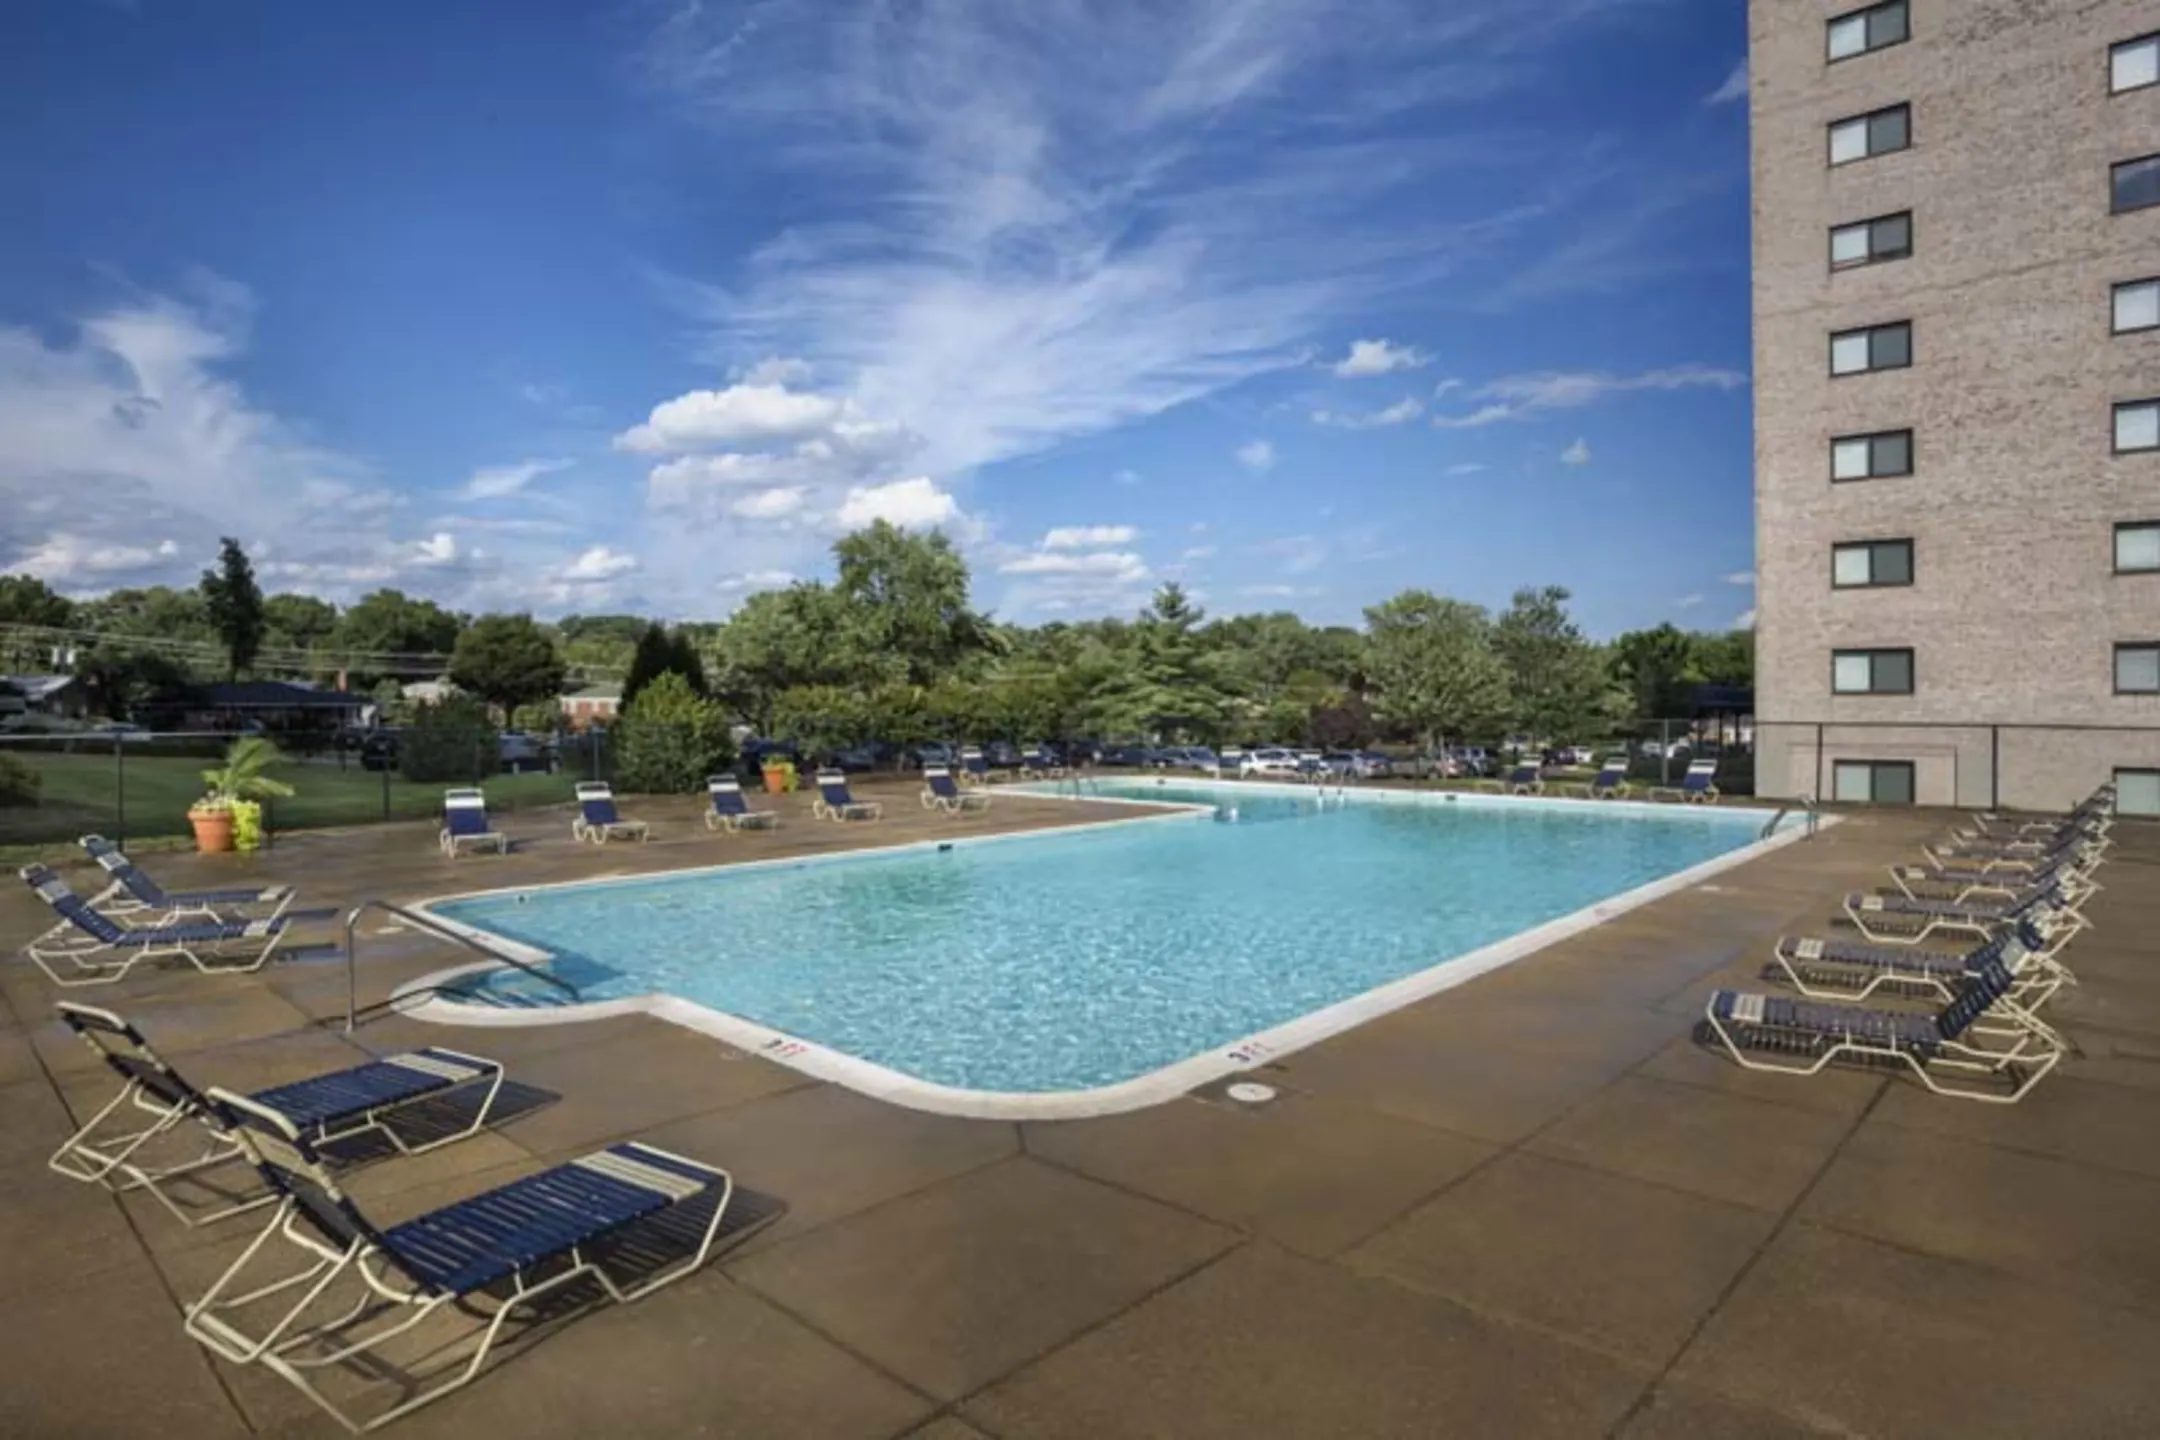 Pool - Iverson Towers & Anton House - Temple Hills, MD